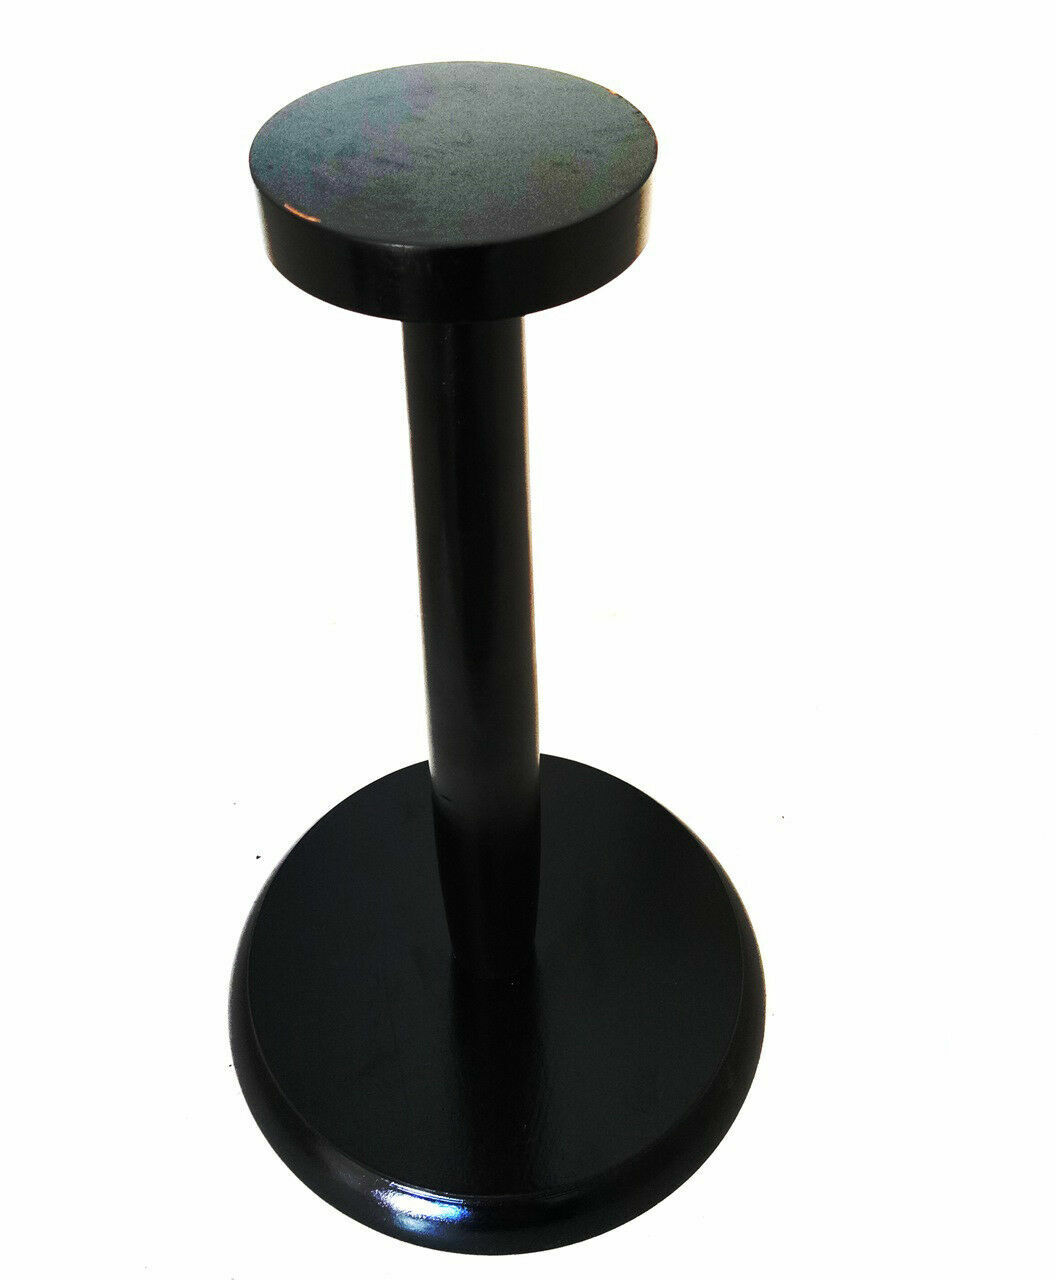 BEAUTIFUL BLACK WOODEN STAND FOR DISPLAY POST FOR HELMET ARMOR STAND NEW GIFT